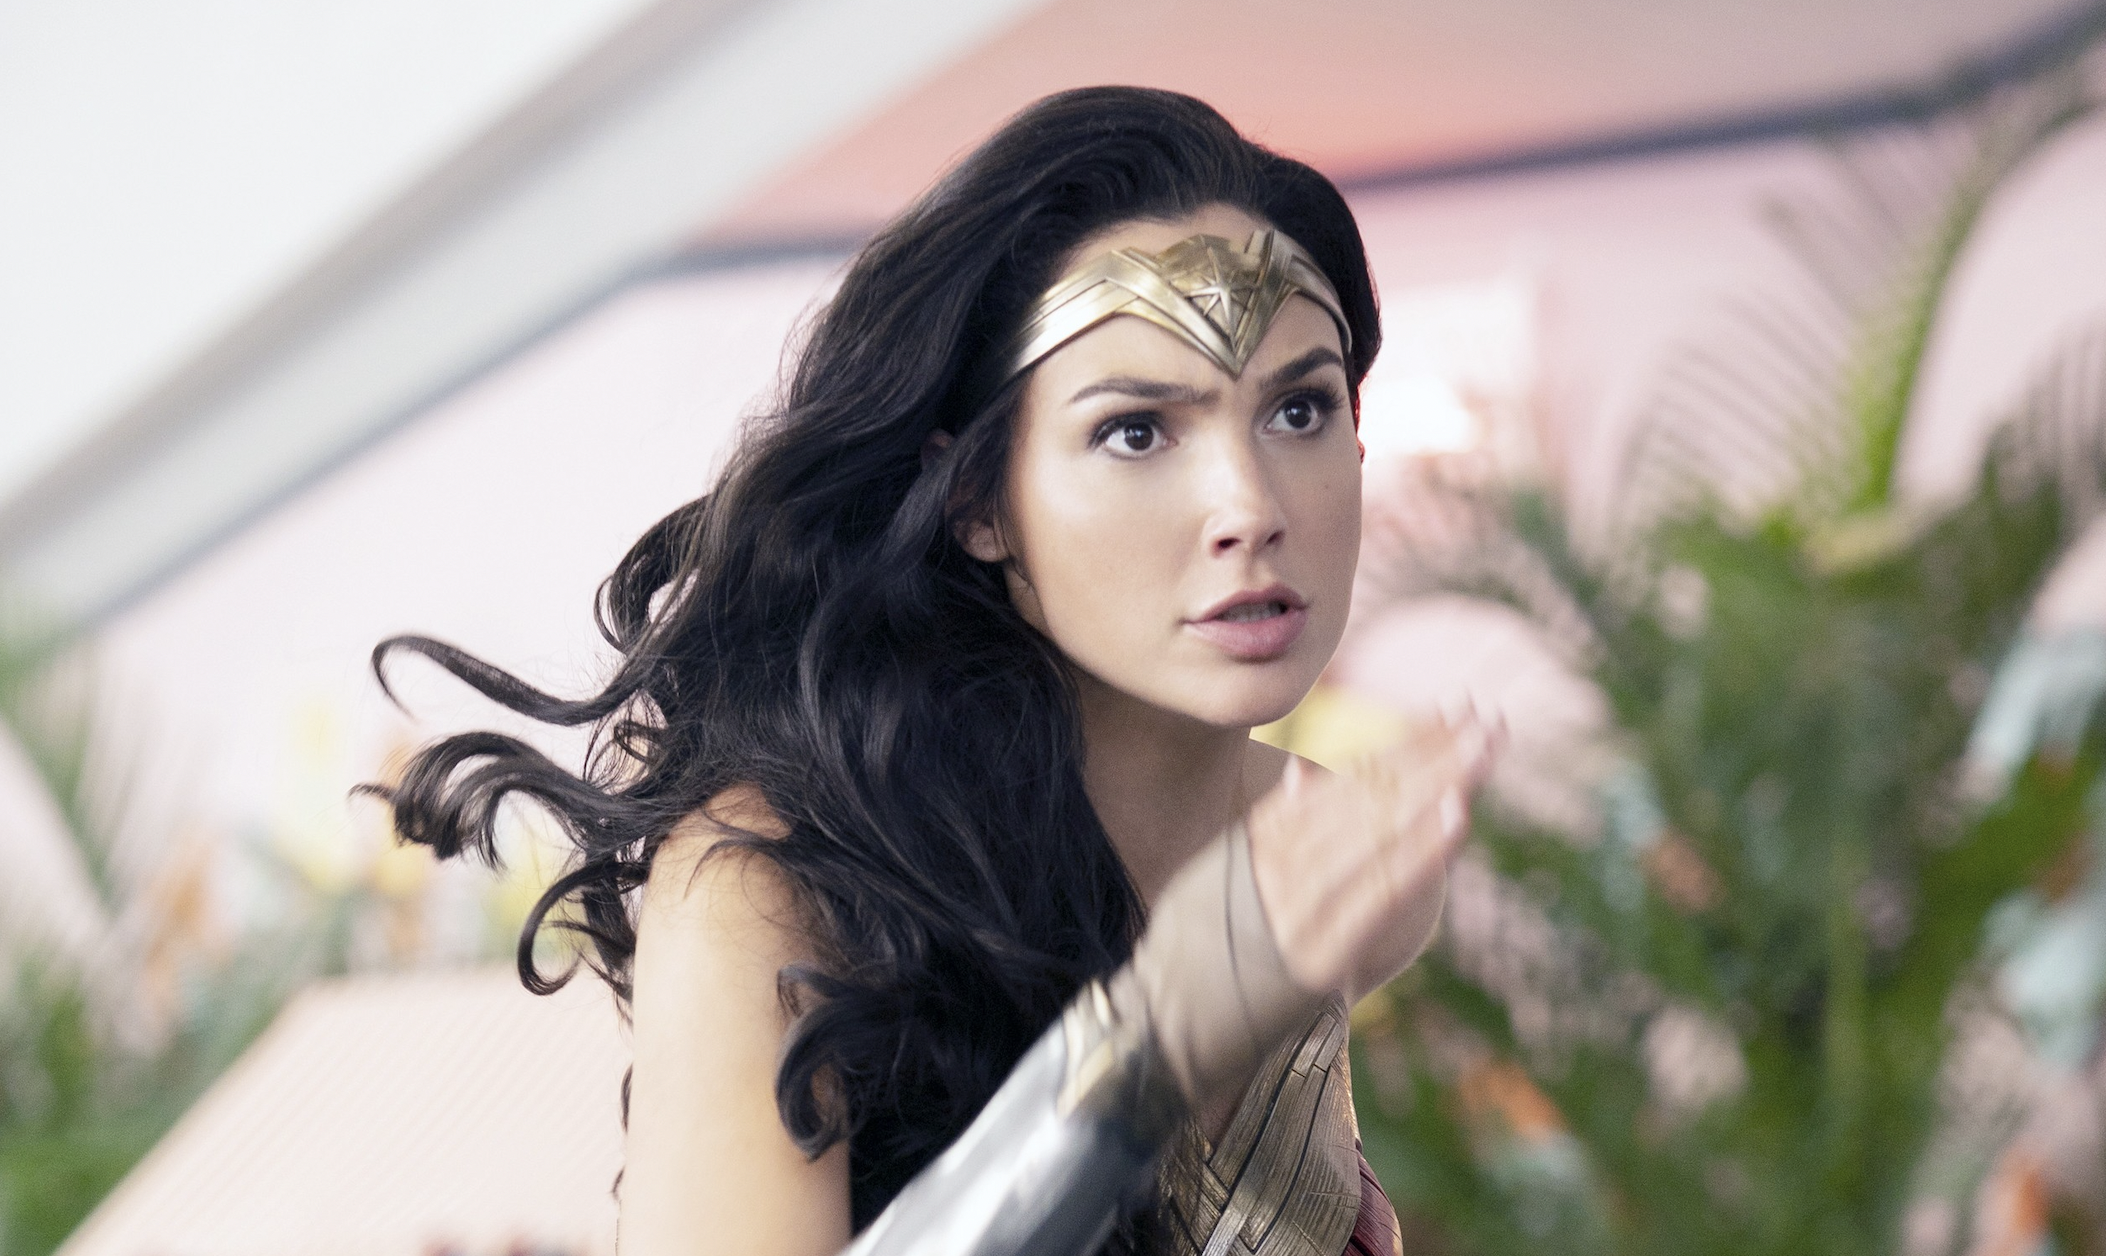 ali amro recommends Deep Fakes Wonder Woman